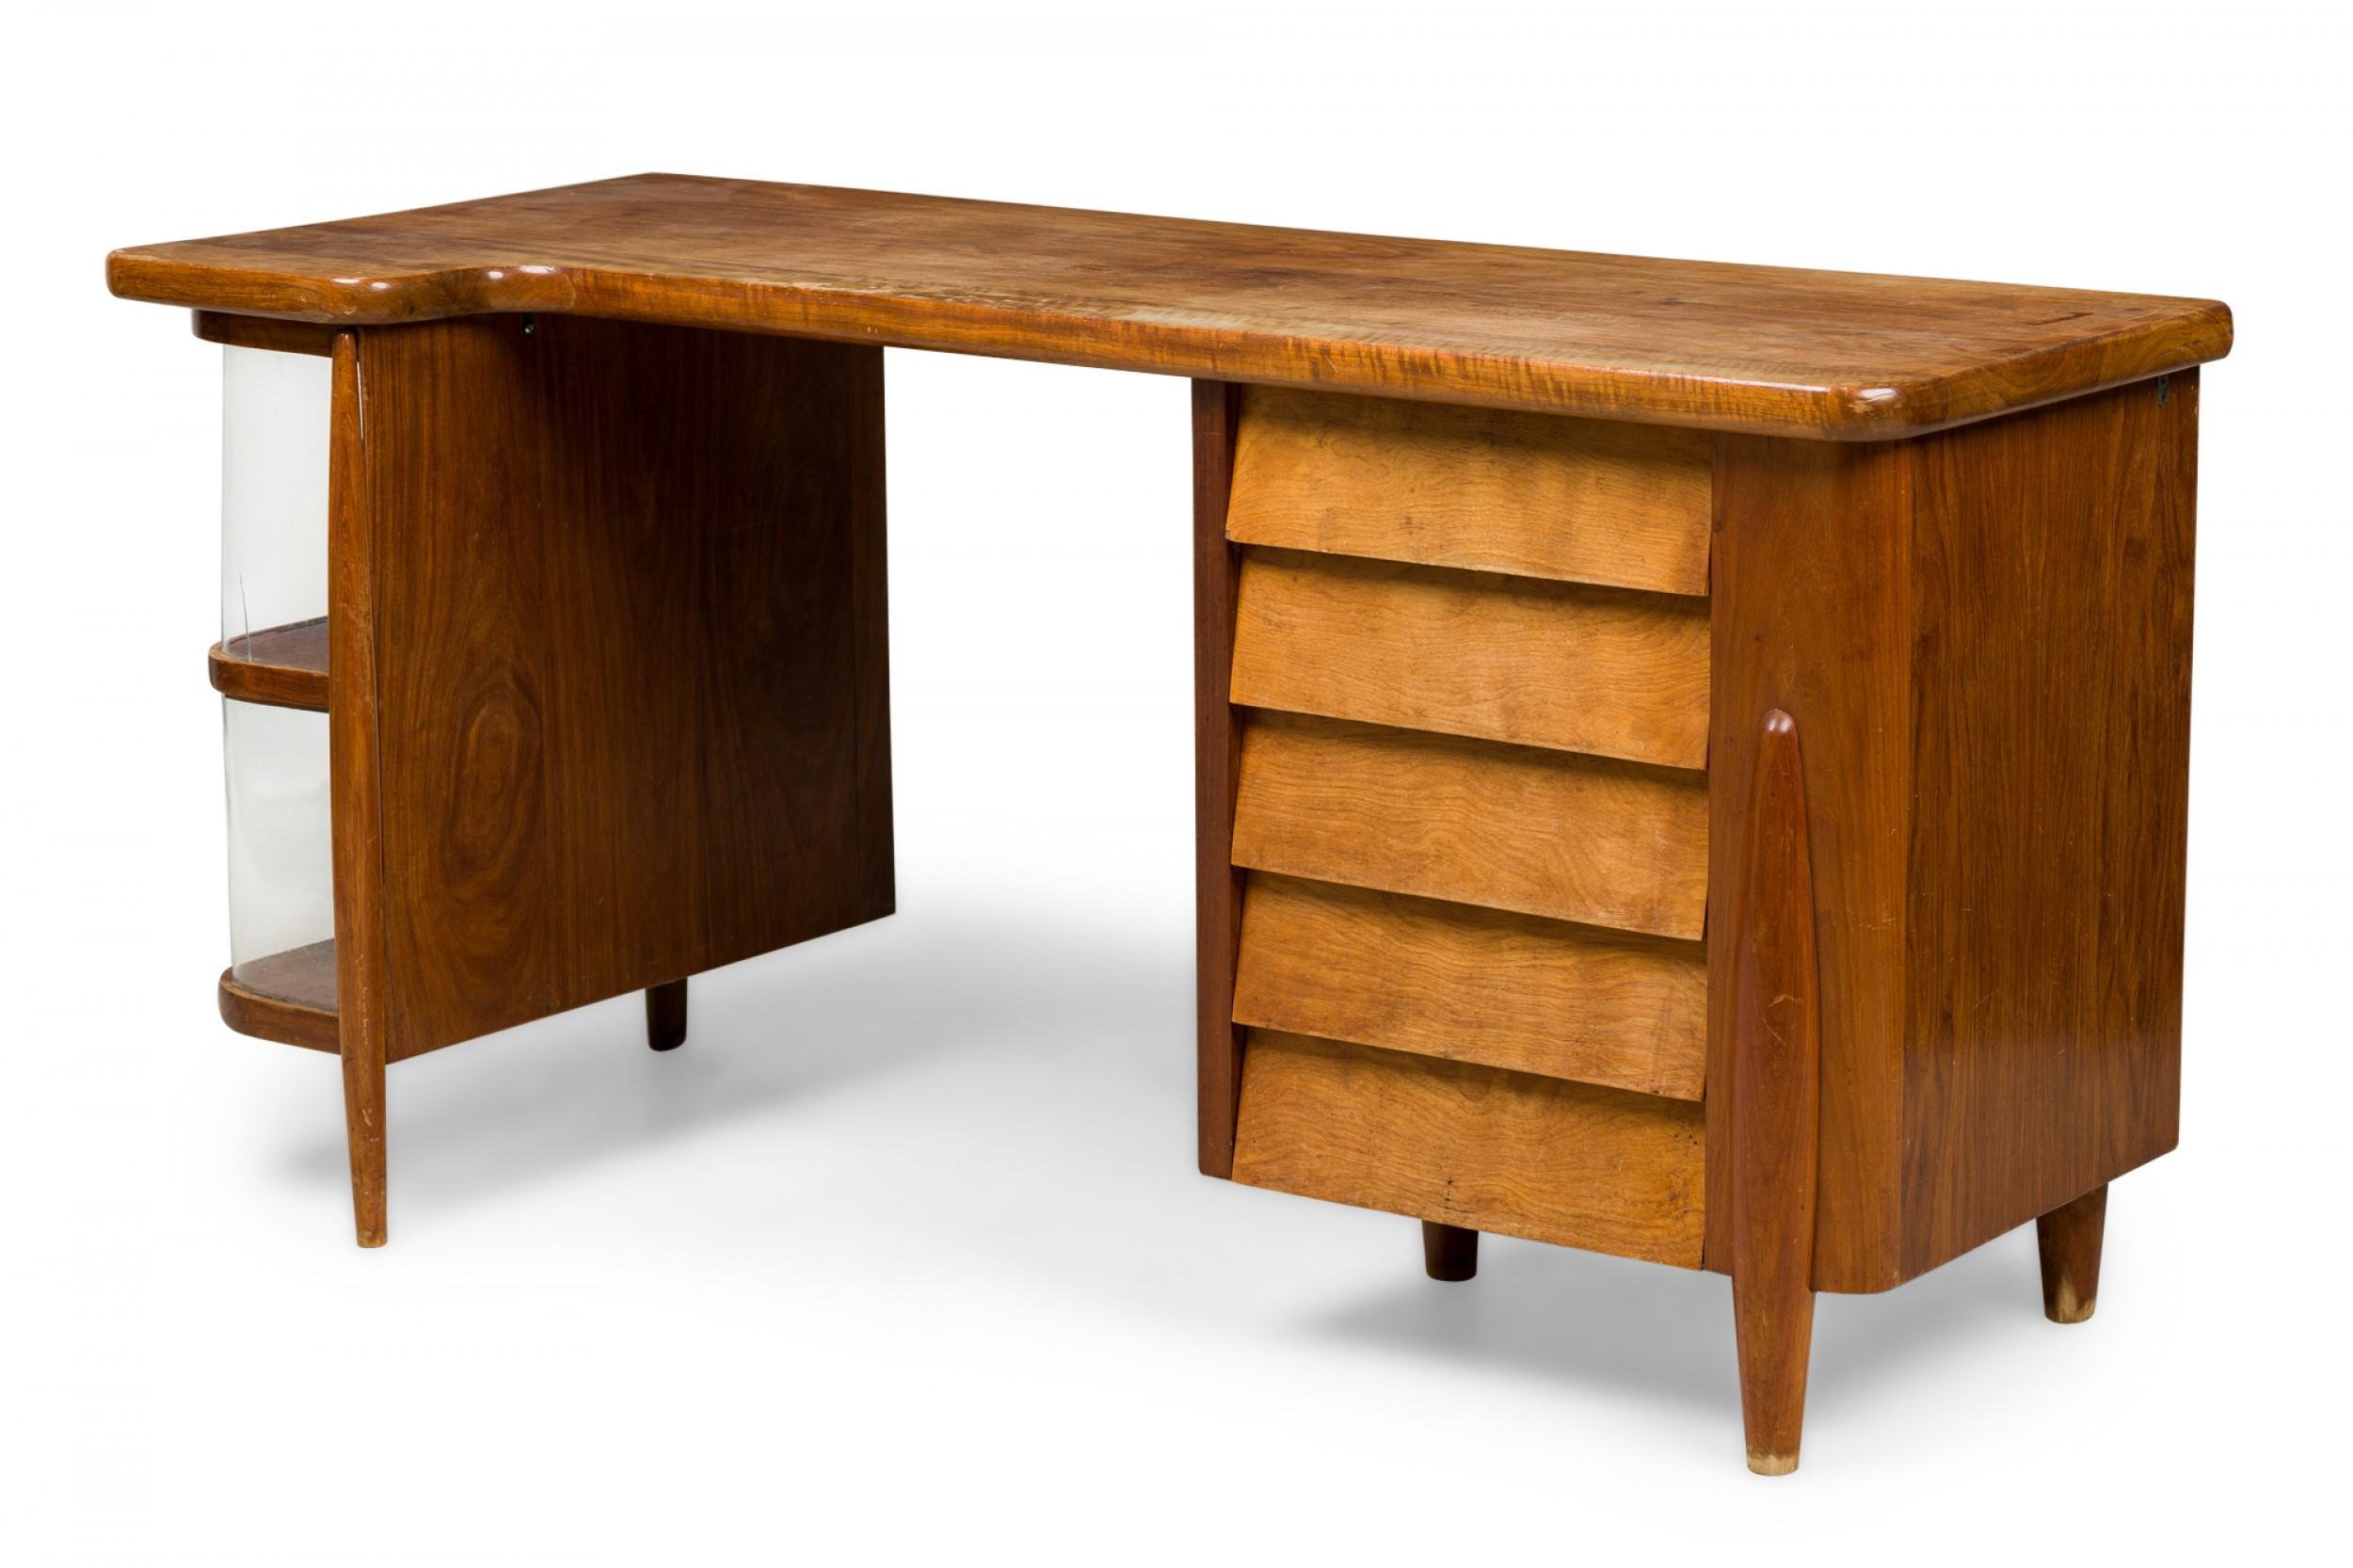 Italian Mid-Century Modern walnut desk featuring a slightly L-shaped top resting on a set of two open compartments with plexiglass supports on the left and 5 louver front drawers on the right, resting on tapered integrated legs. (manner of GIO PONTI)